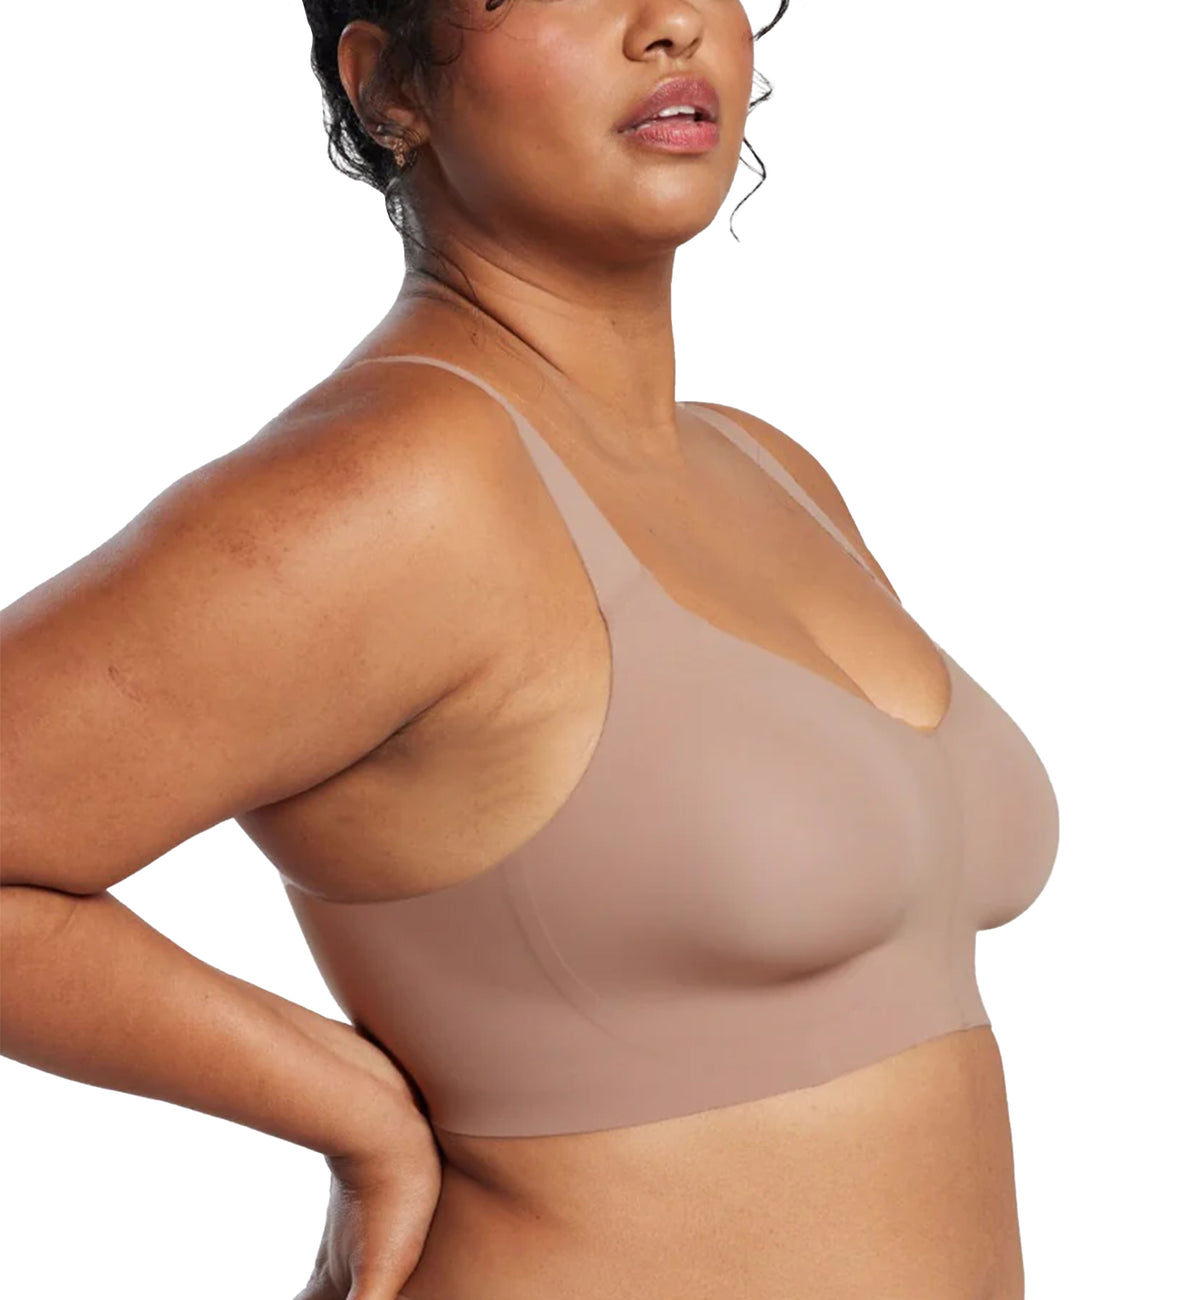 Evelyn &amp; Bobbie BEYOND Adjustable Bra (1732),Small,Willow - Willow,Small